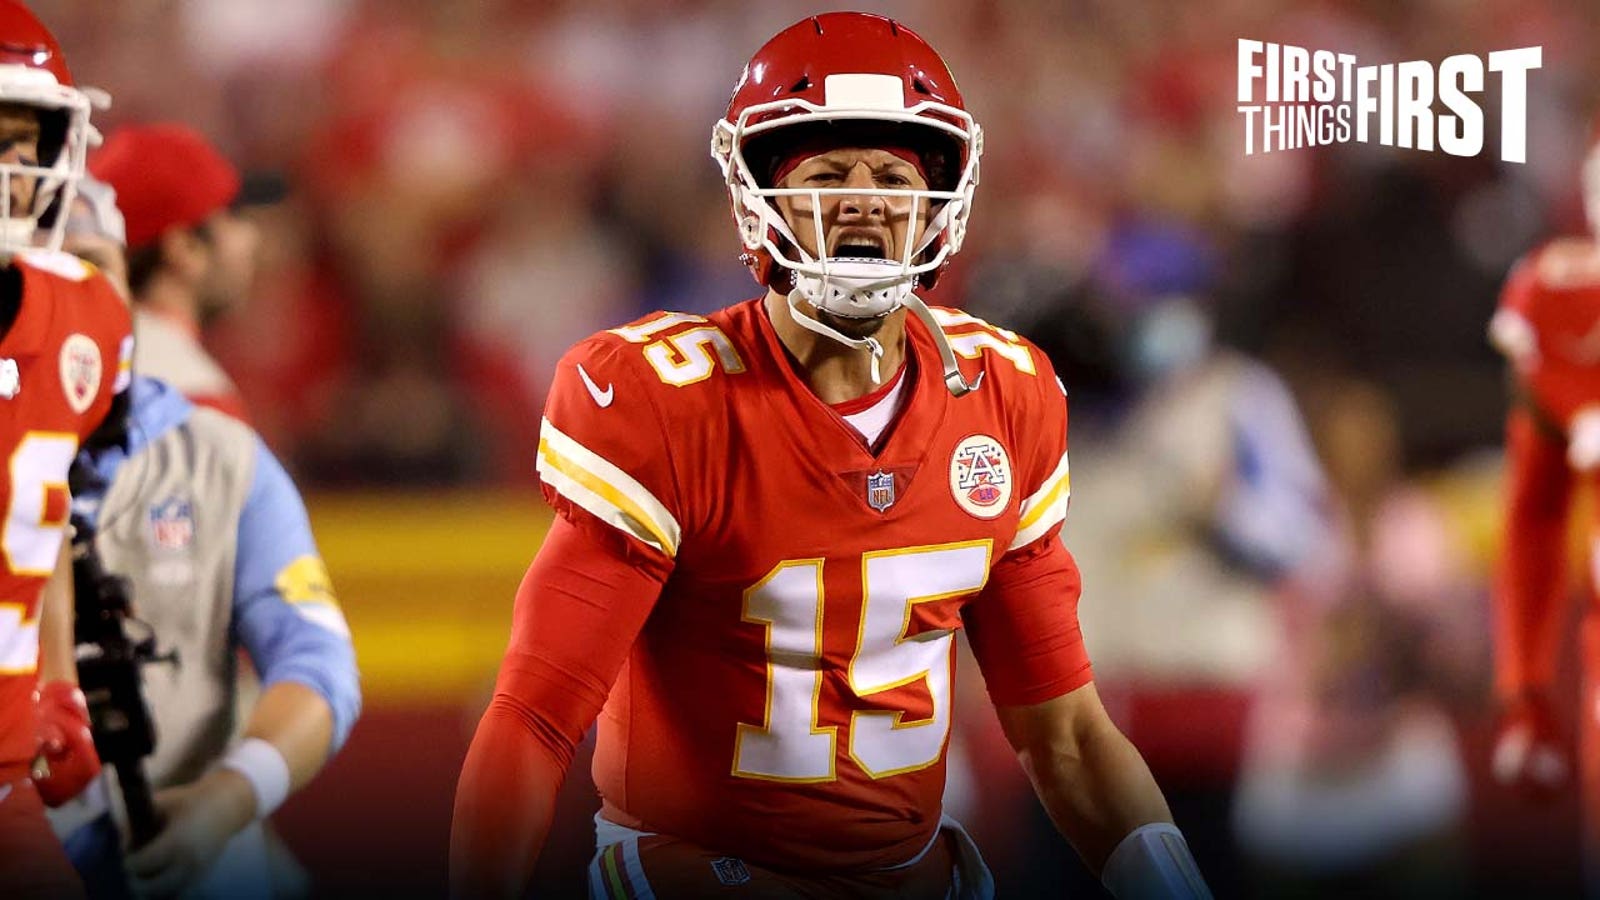 Nick Wright is in trouble after Kansas City falls to Buffalo: 'The Chiefs are facing an uphill climb' I FIRST THINGS FIRST